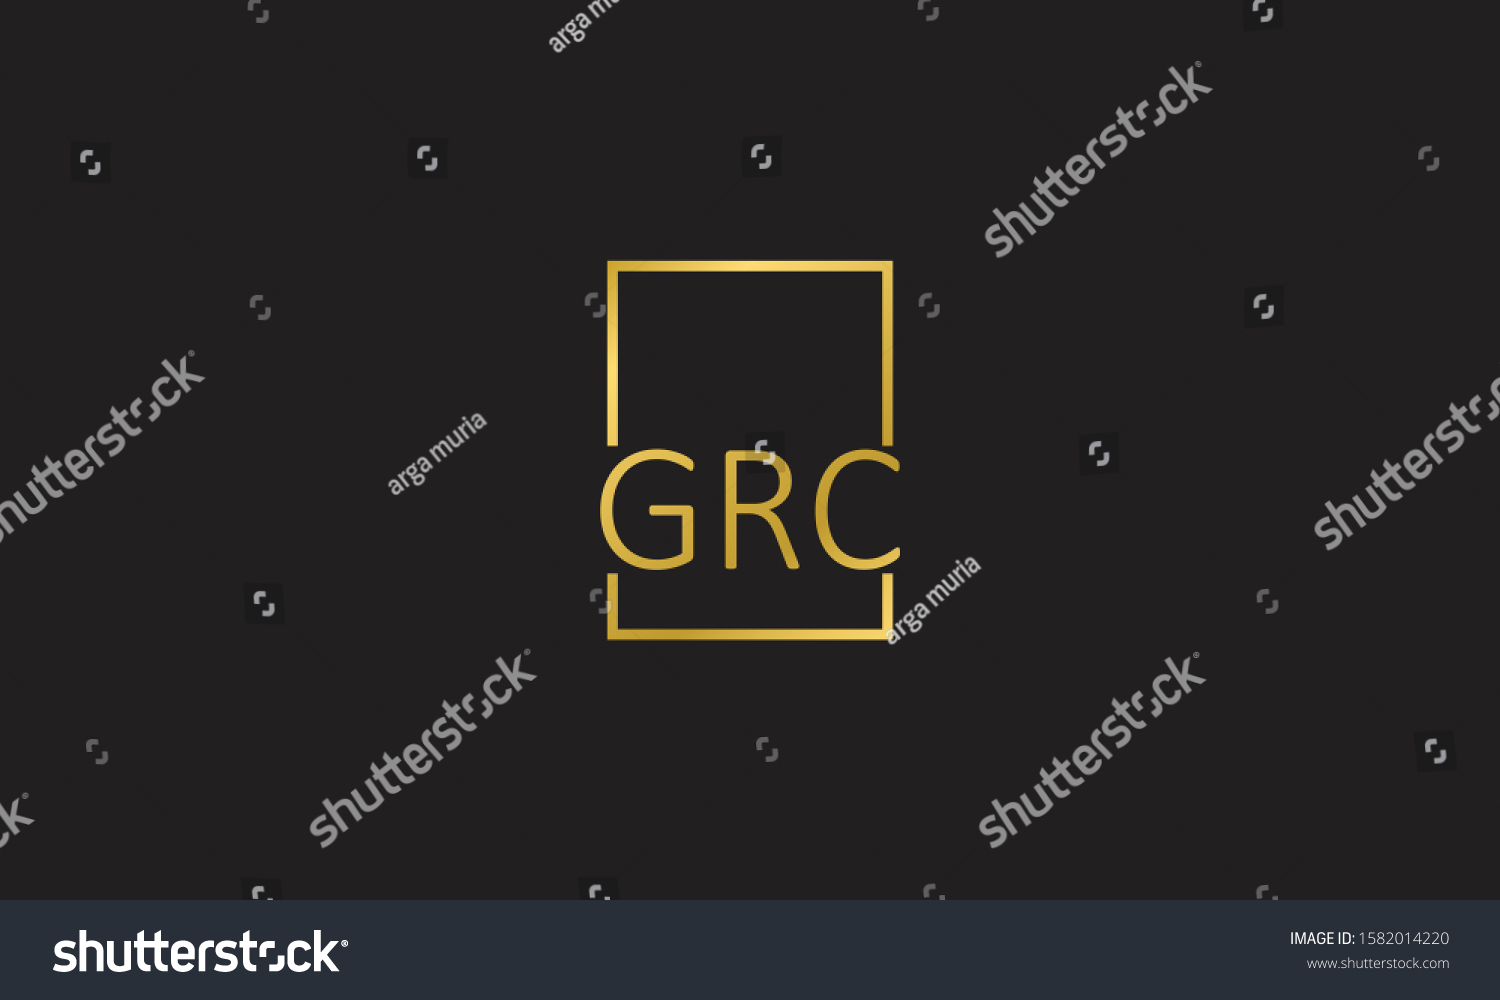 SVG of creative simple geometric GRC initial logo template with golden colour for any business or digital cryptocurrency, blockchain, Vector illustration eps 10 svg